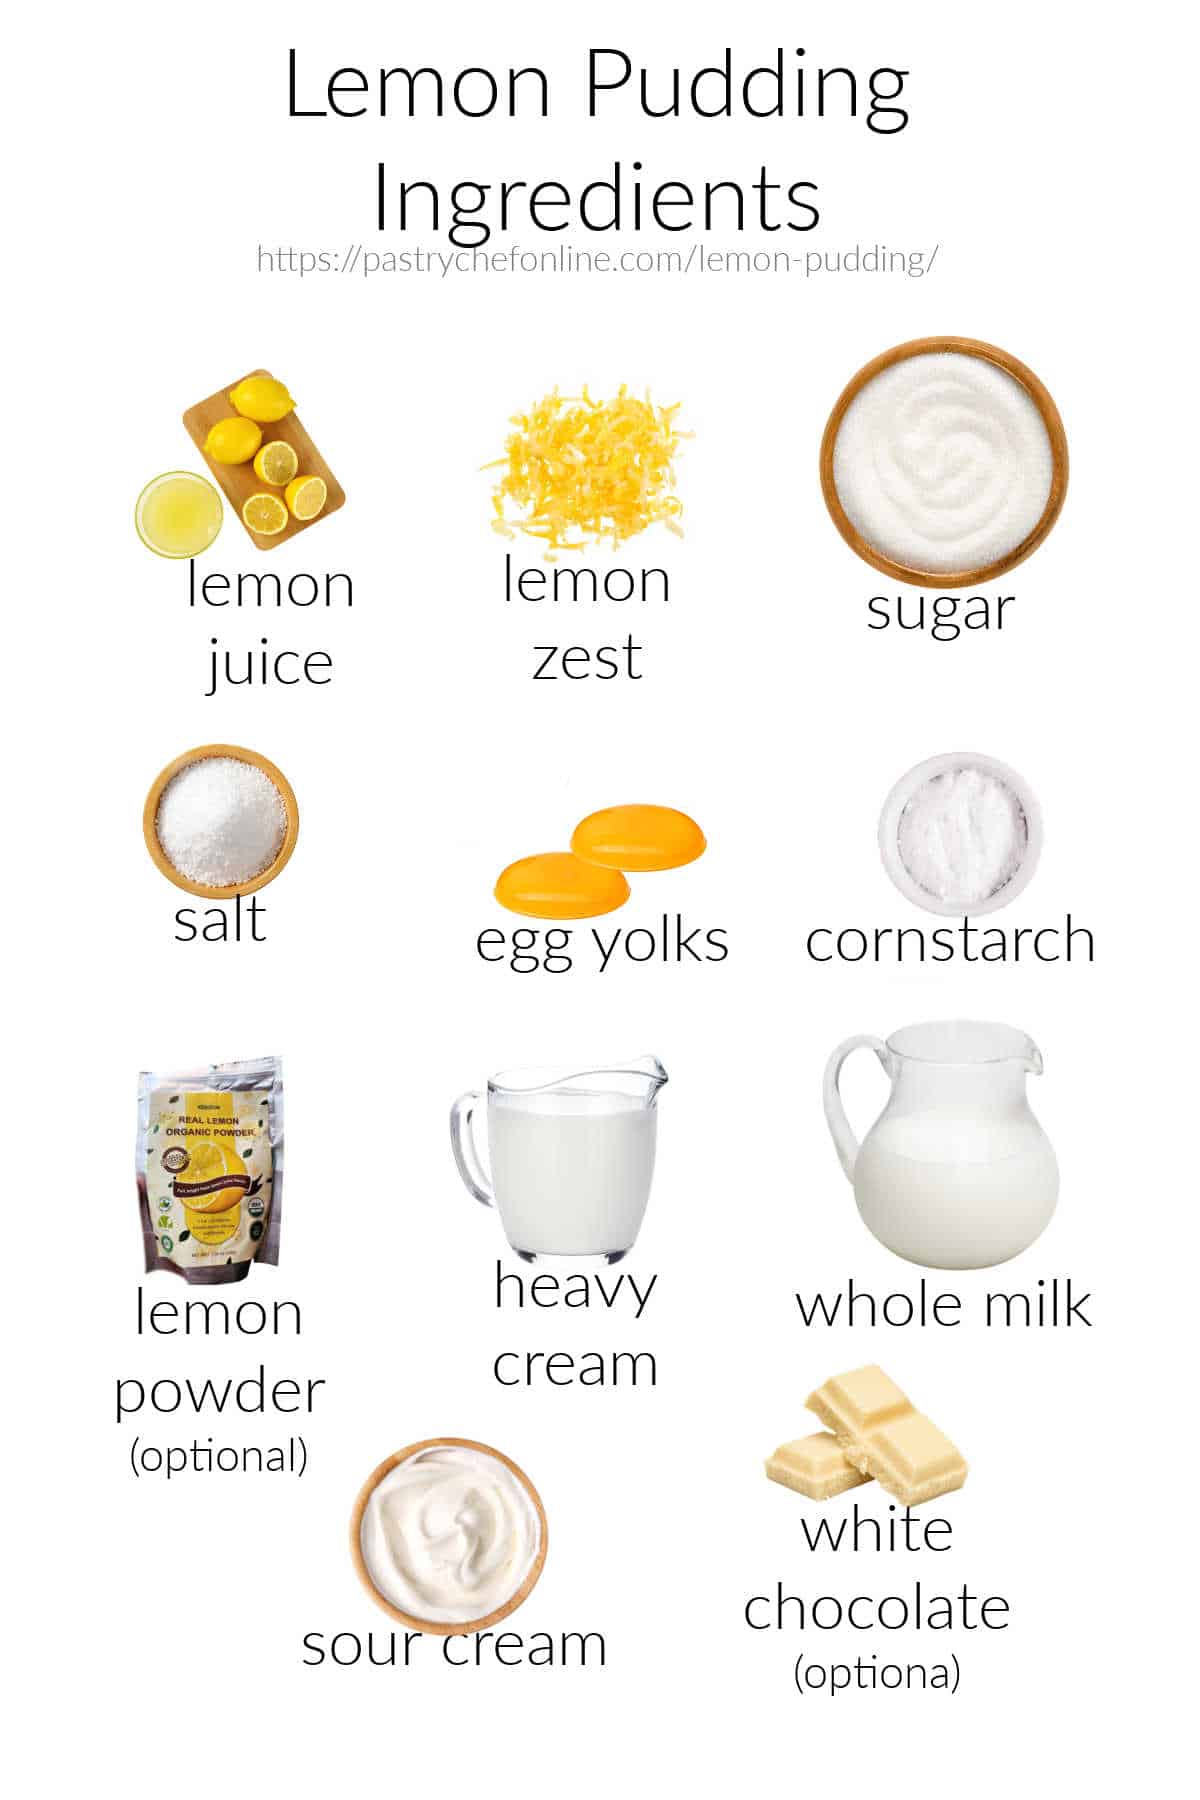 All the ingredients needed to make lemon pudding, labeled, and shot on a white background. ingredients are: lemon juice, lemon zest, sugar, salt, egg yolks, cornstarch, powdered lemon, heavy cream, whole milk, sour cream, and white chocolate.